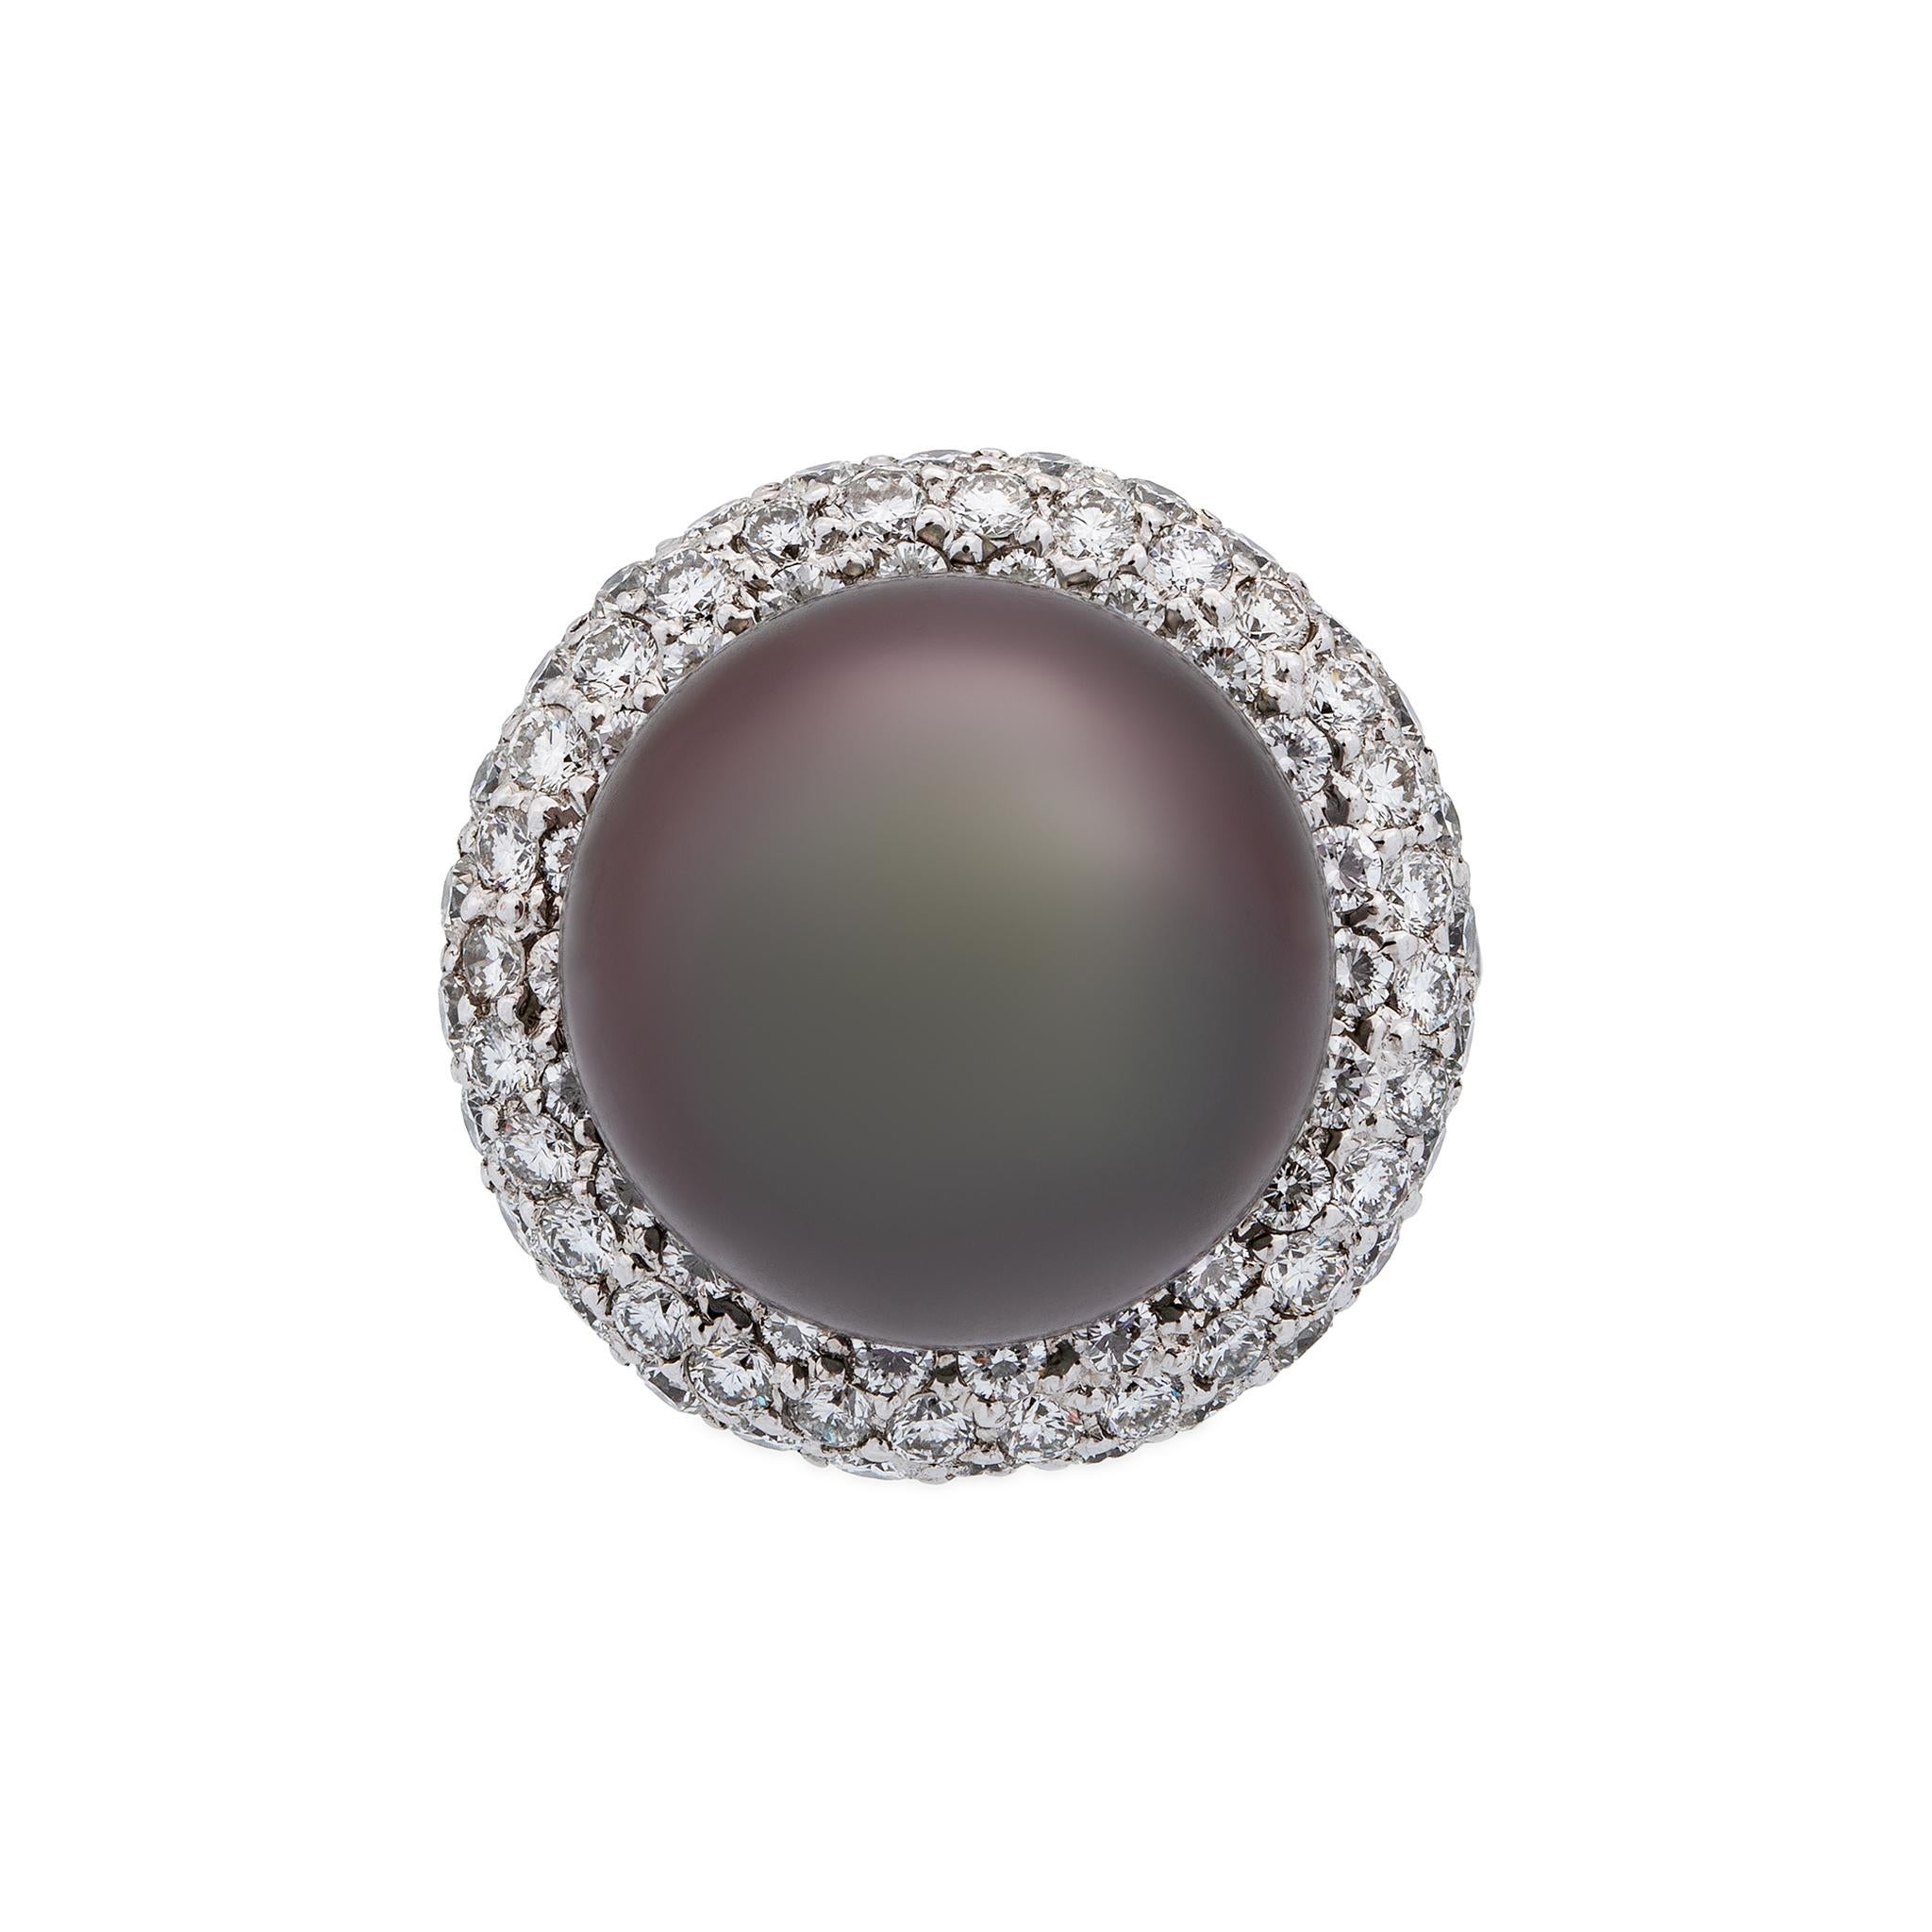 METAL TYPE: 18K White Gold
STONE WEIGHT: 4.50ct twd - estimated
TOTAL WEIGHT: 19.0g
RING SIZE: 5.75 (re-sizeable)